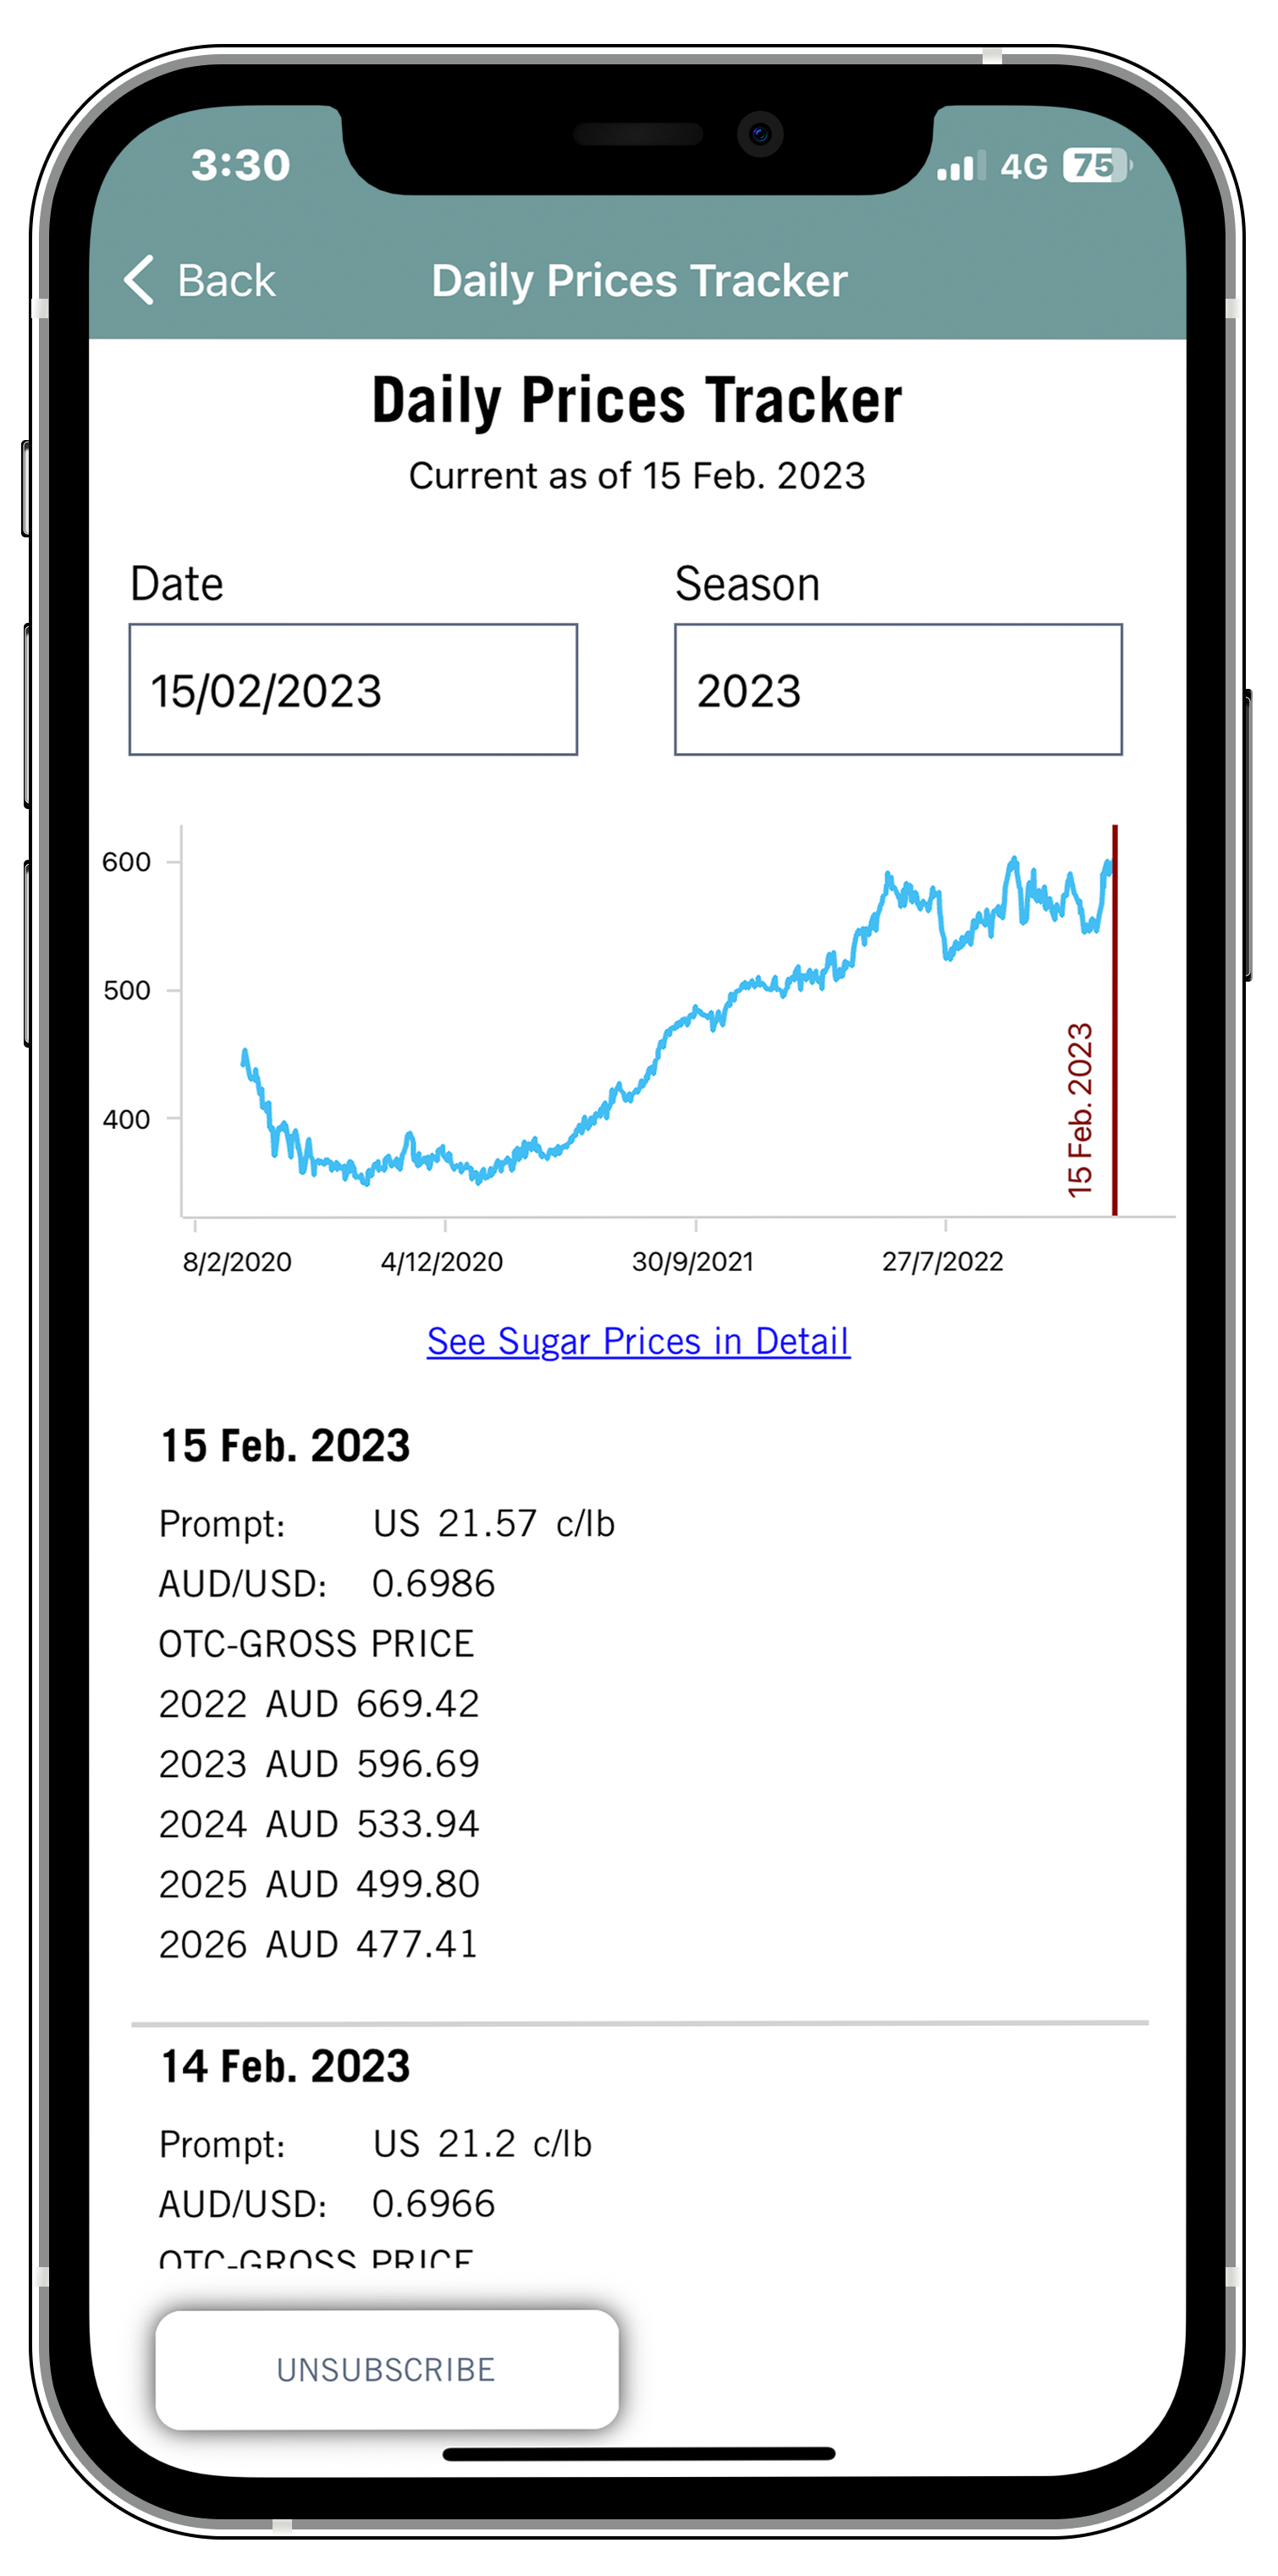 Daily Price Tracker Screenshot Mockup for QSL Mobile App